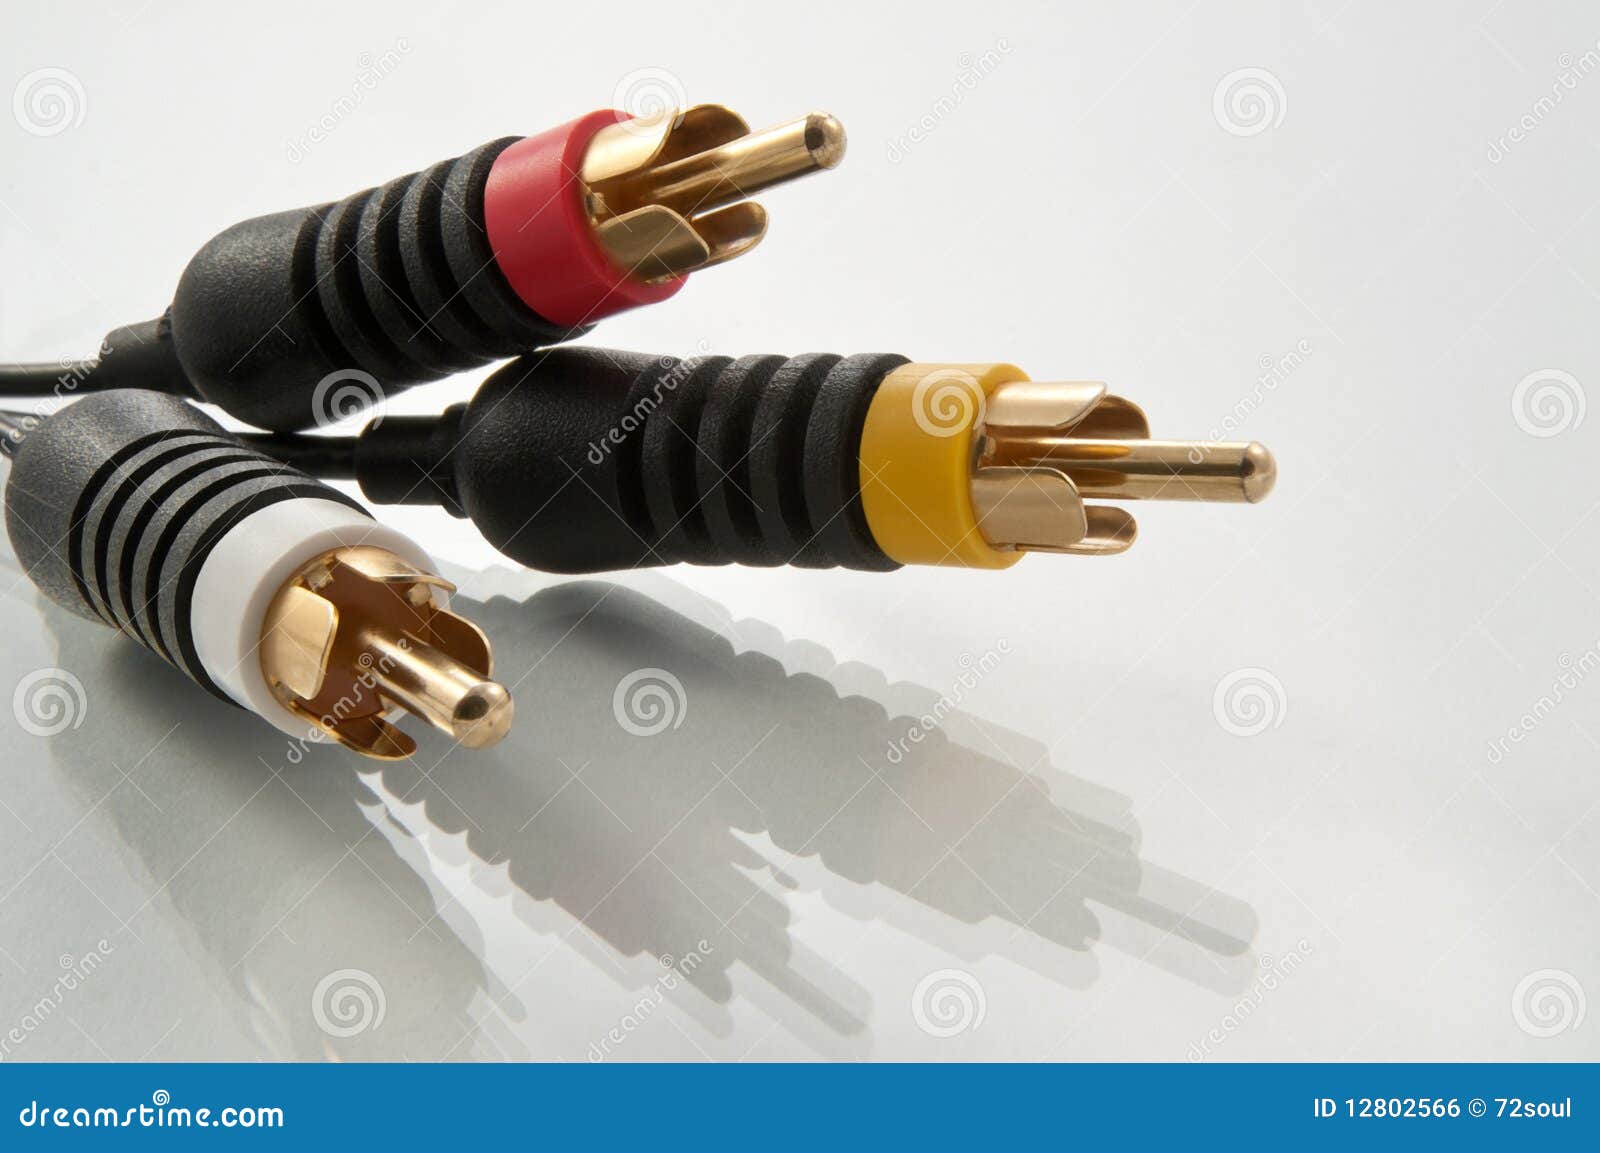 AV Cable For Connecting Video And Audio Signals On A White Background Stock  Photo, Picture and Royalty Free Image. Image 35981098.